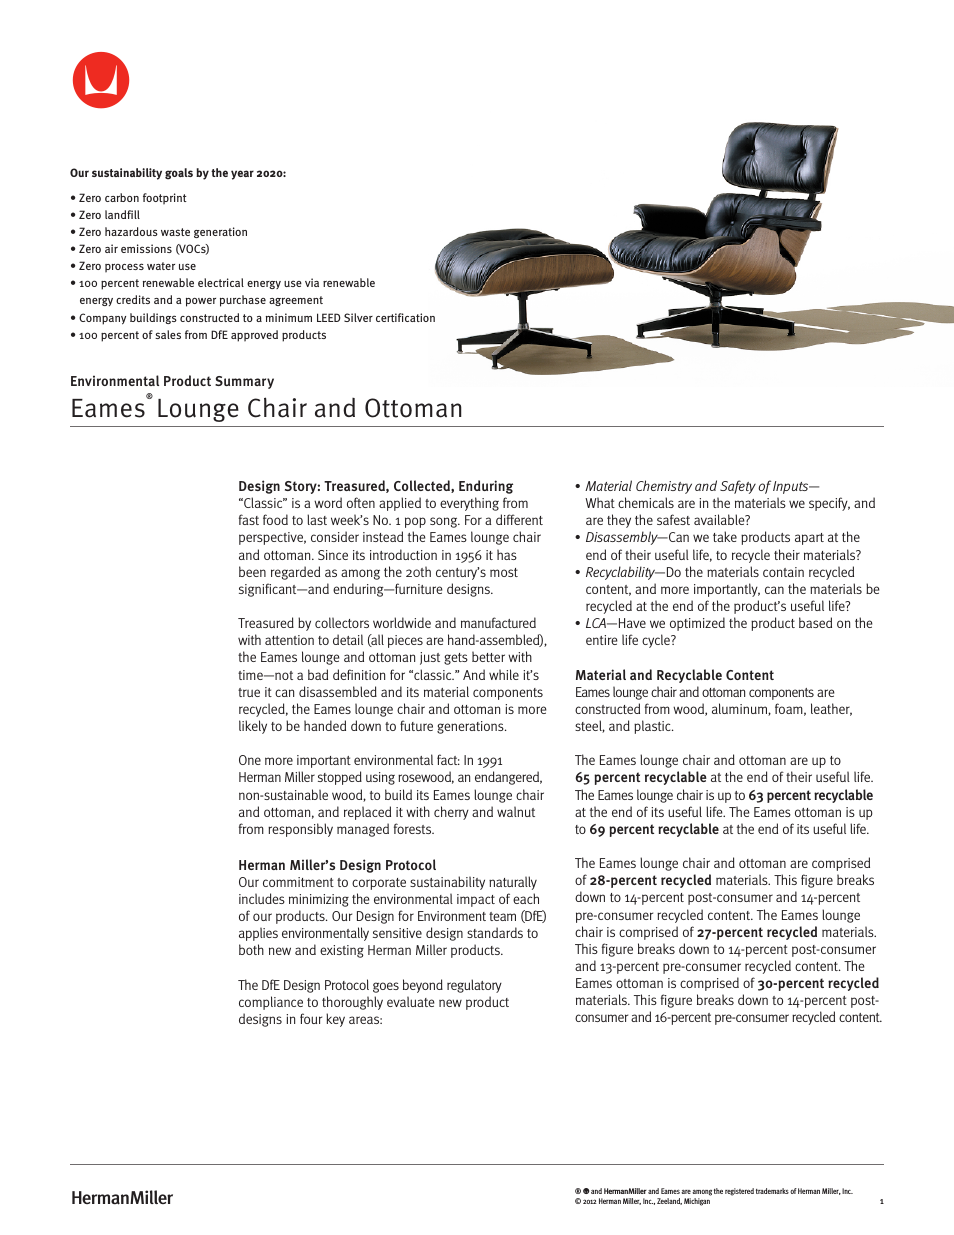 Eames Lounge Chair and Ottoman - Environmental Product Summary